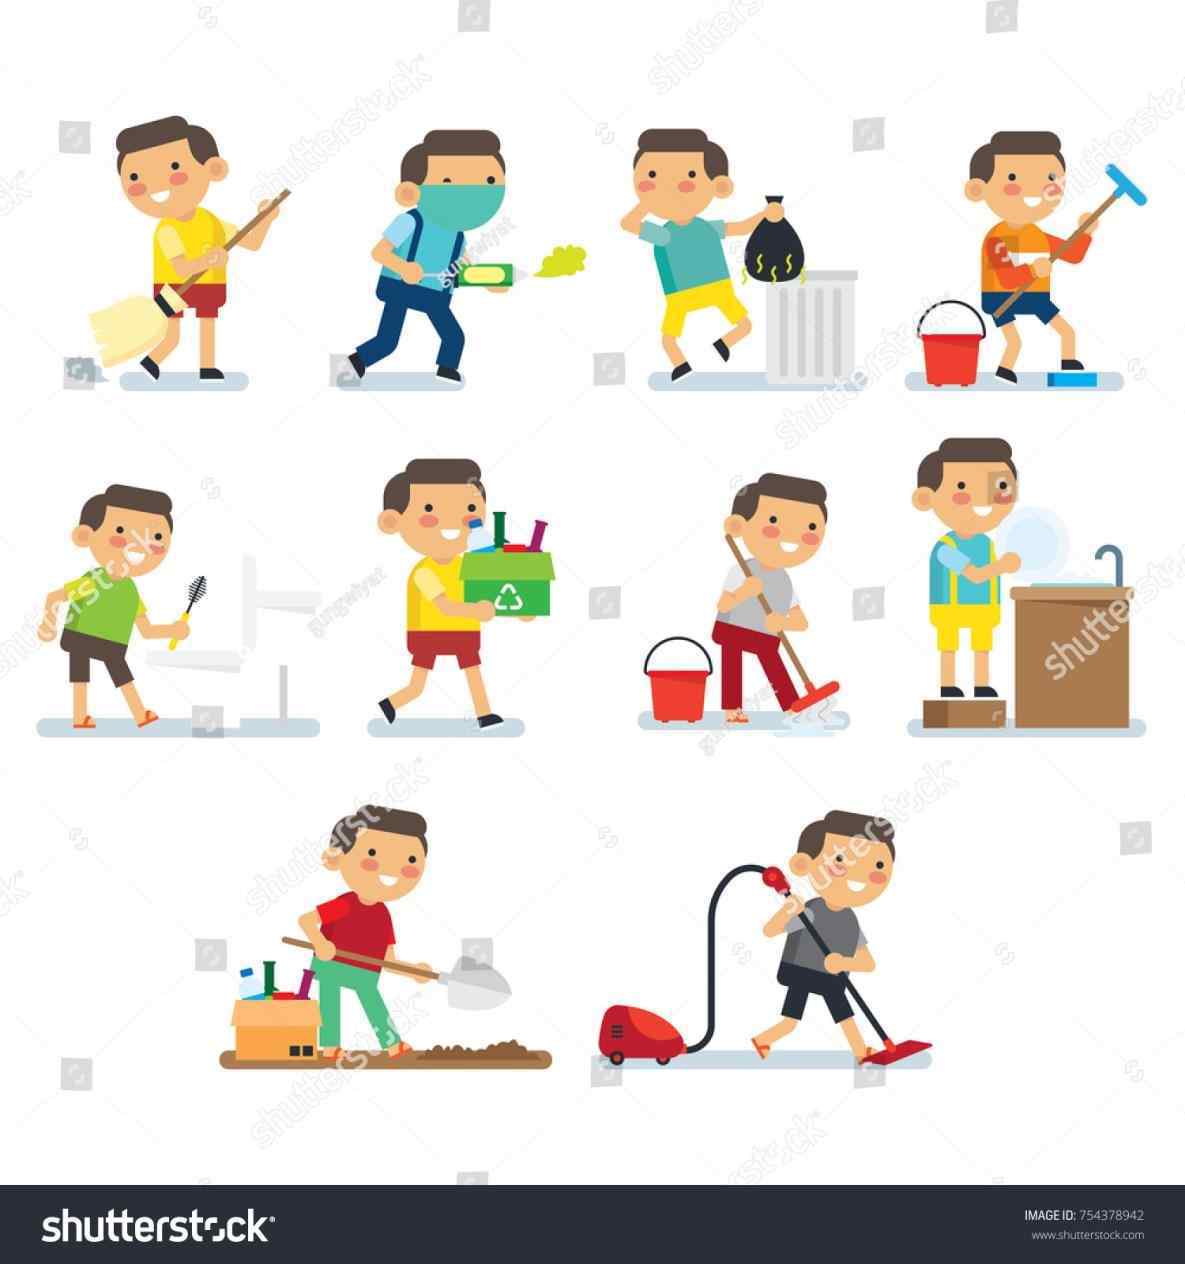 Free download clip art. Activities clipart healthy lifestyle